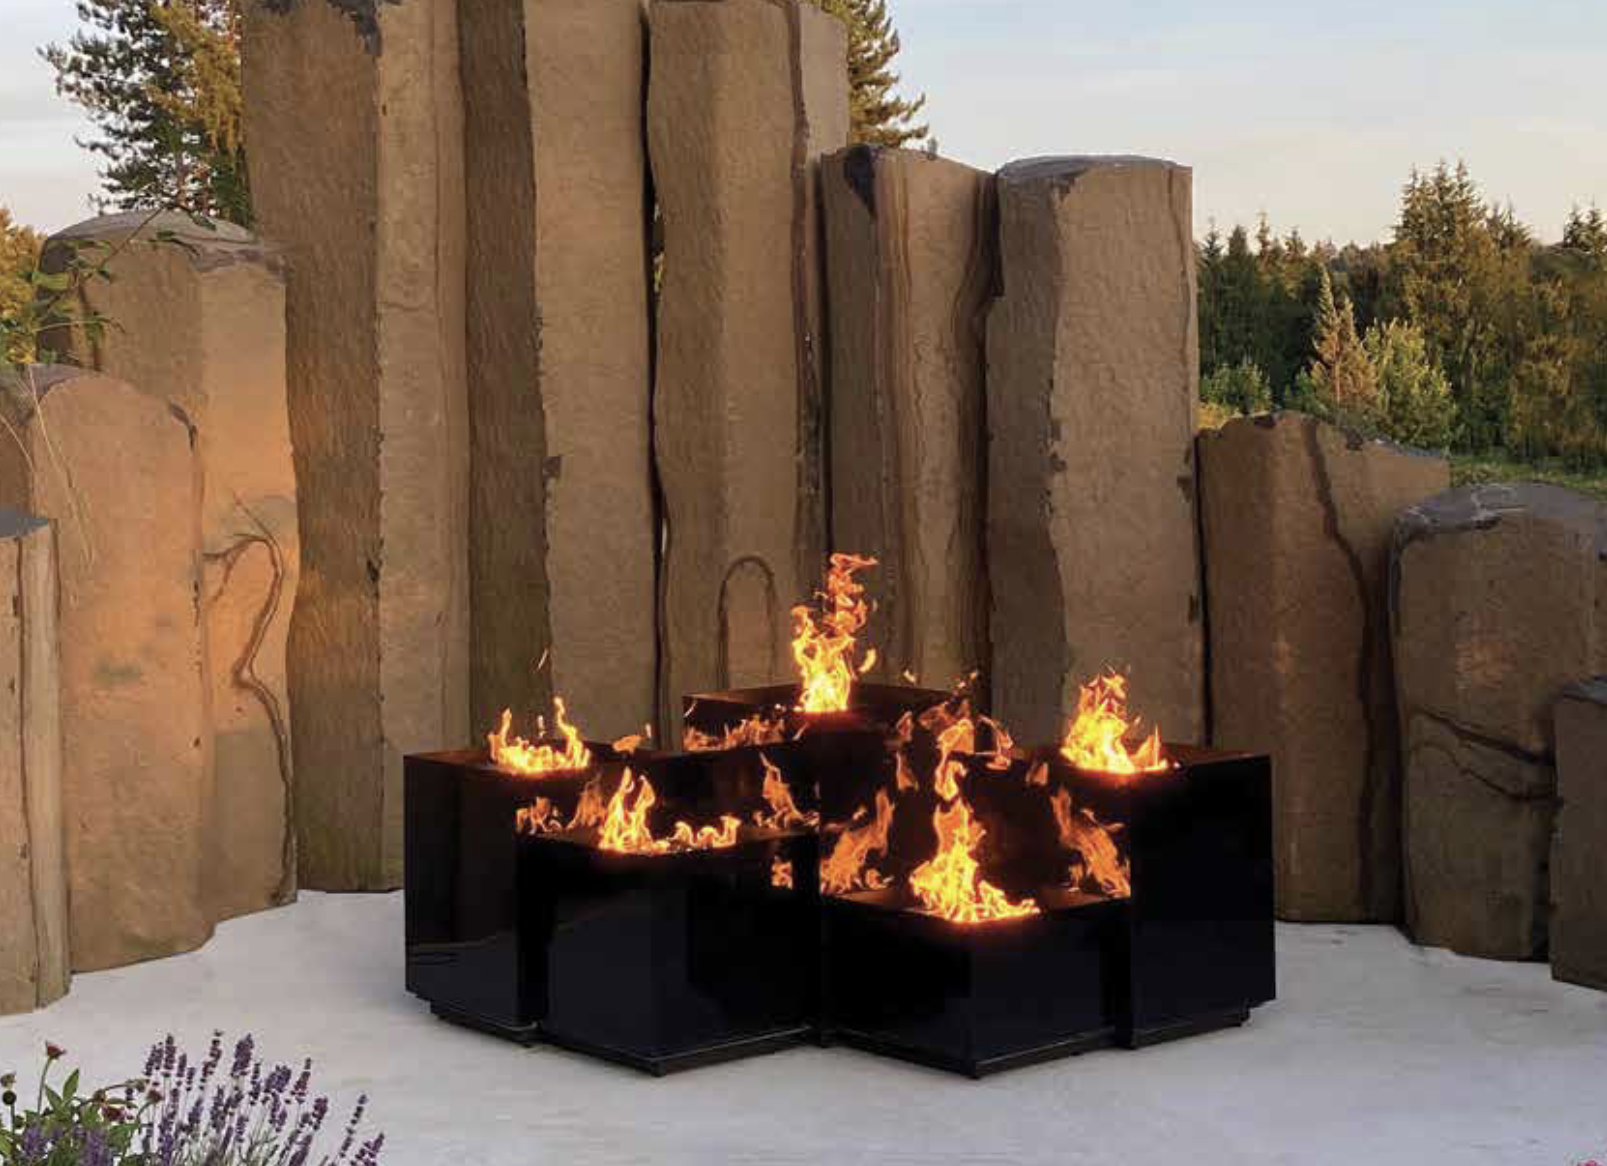 Southern Coast Fireplaces Fire Garden Prism Outdoor Fire Sculpture Outdoor fire feature pool fire feature fire bowl glass fire bowl